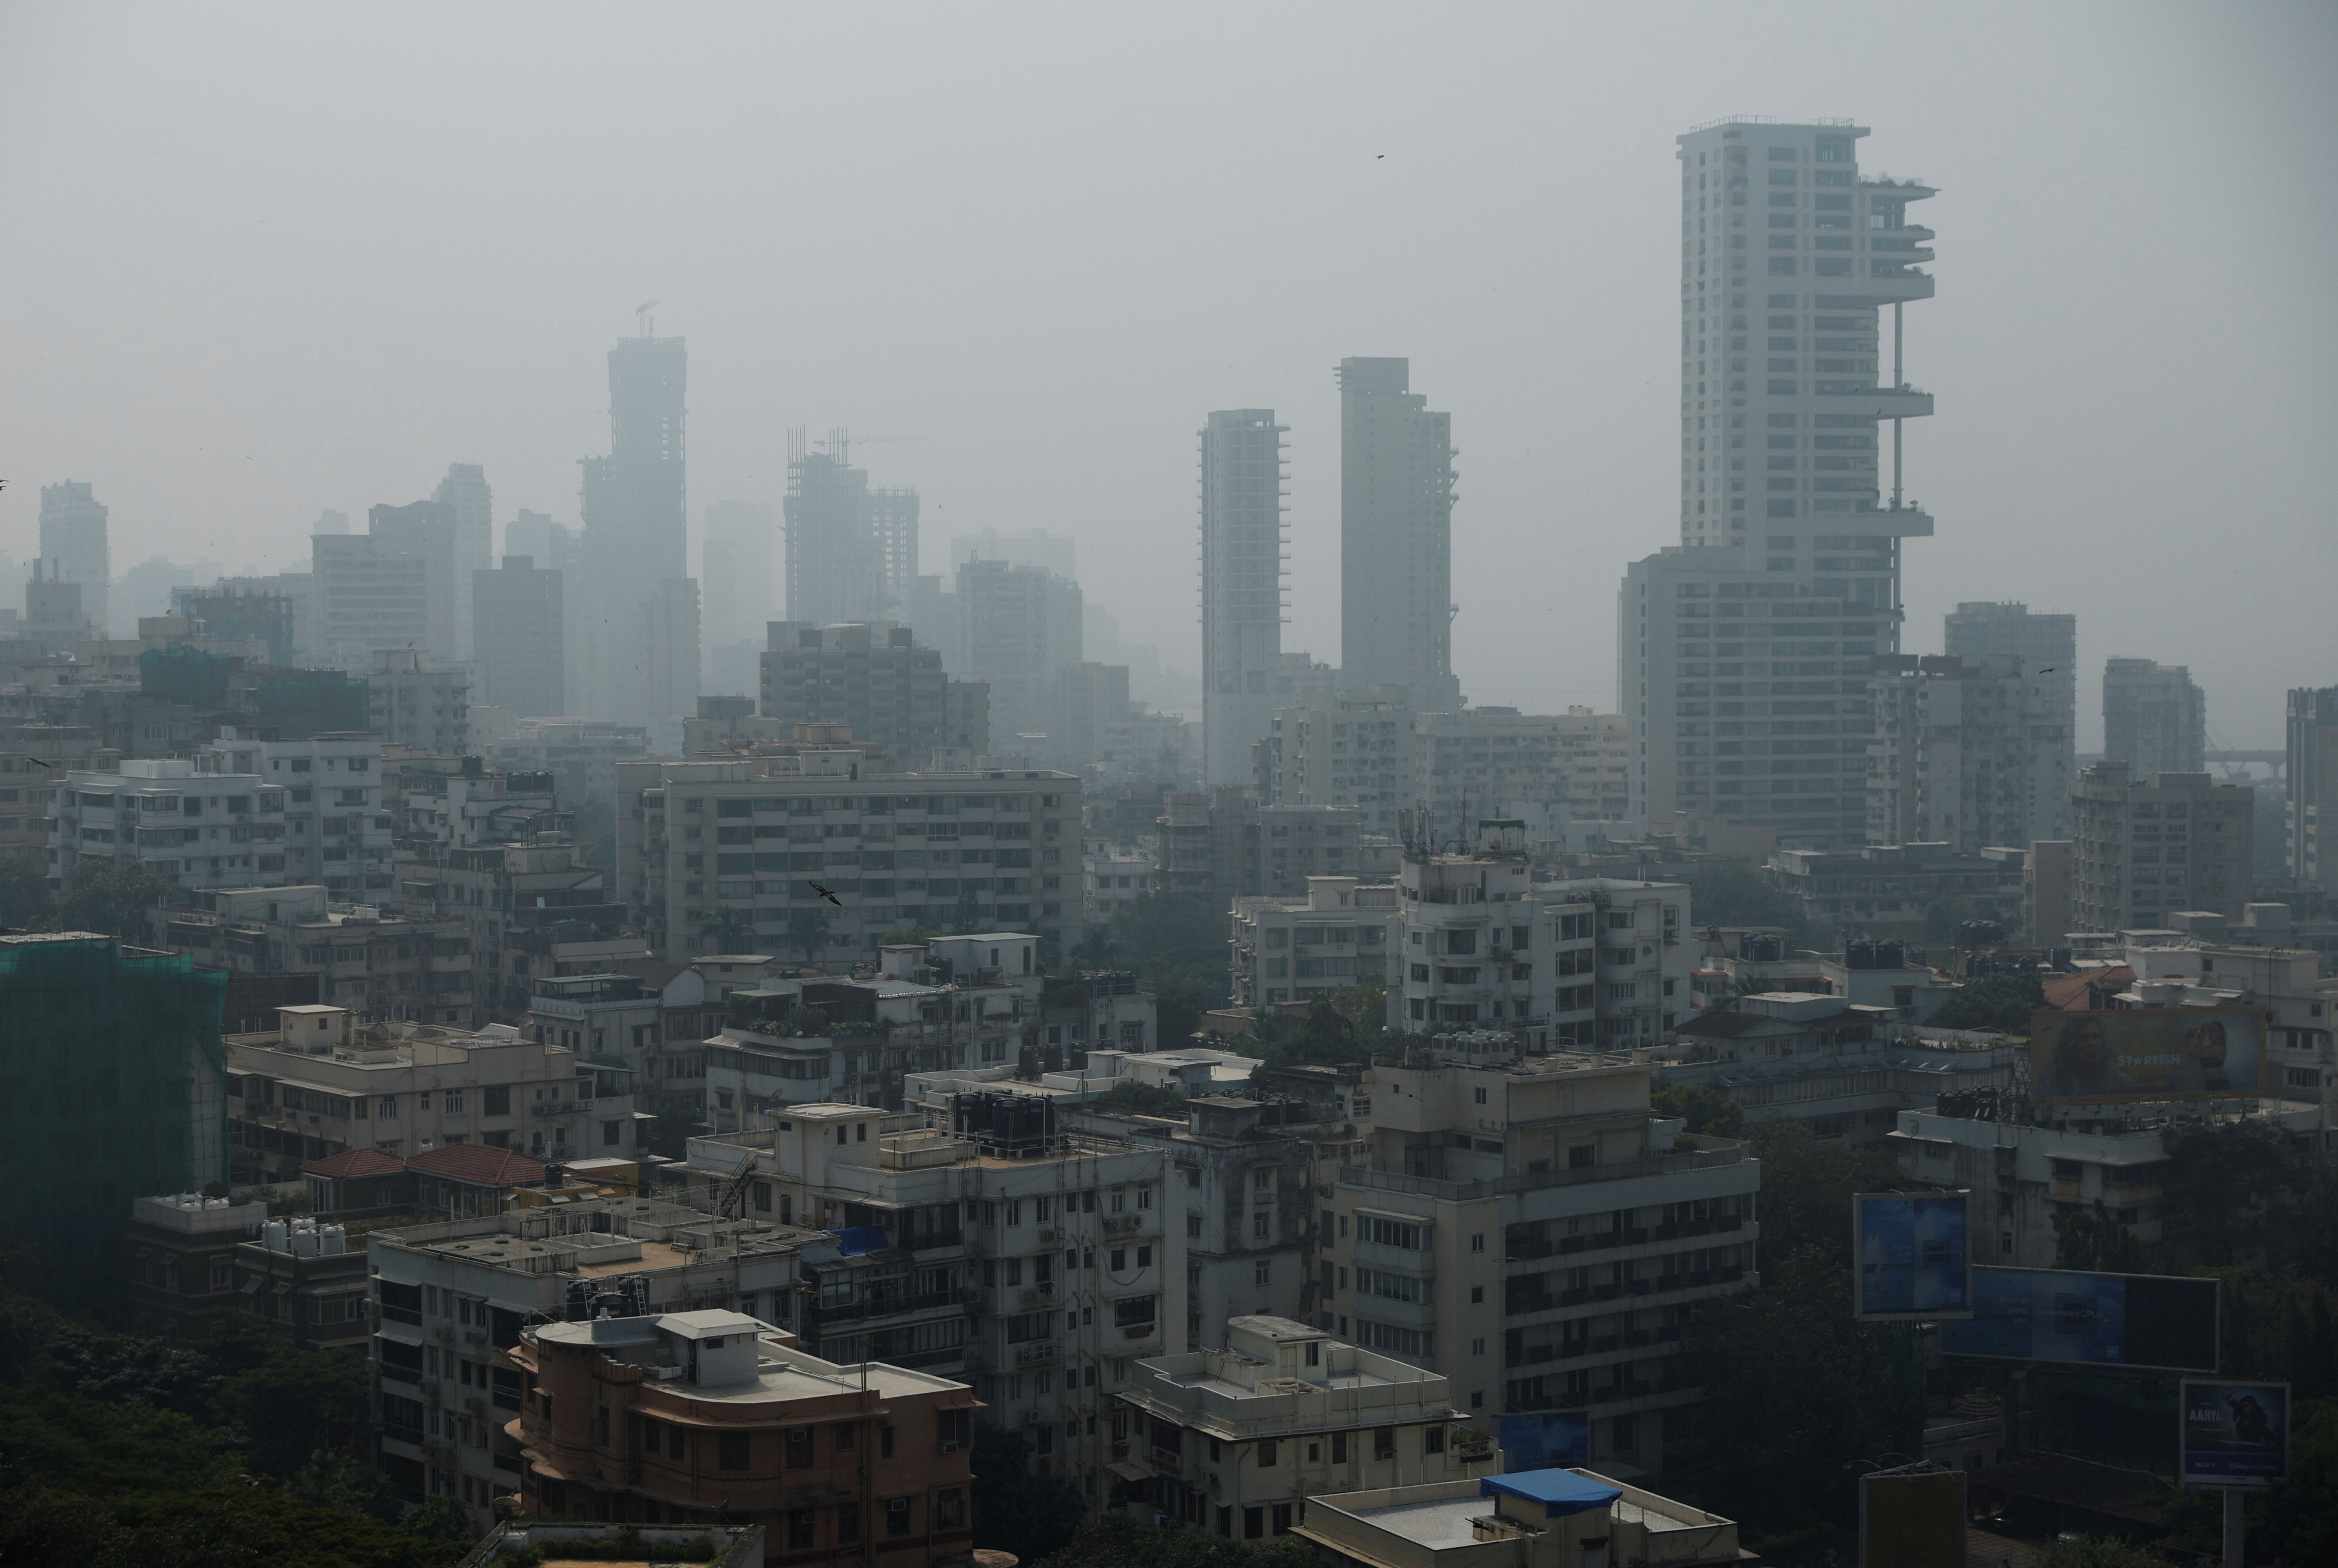 A general view of high-rise residential buildings amidst other residential buildings in Mumbai